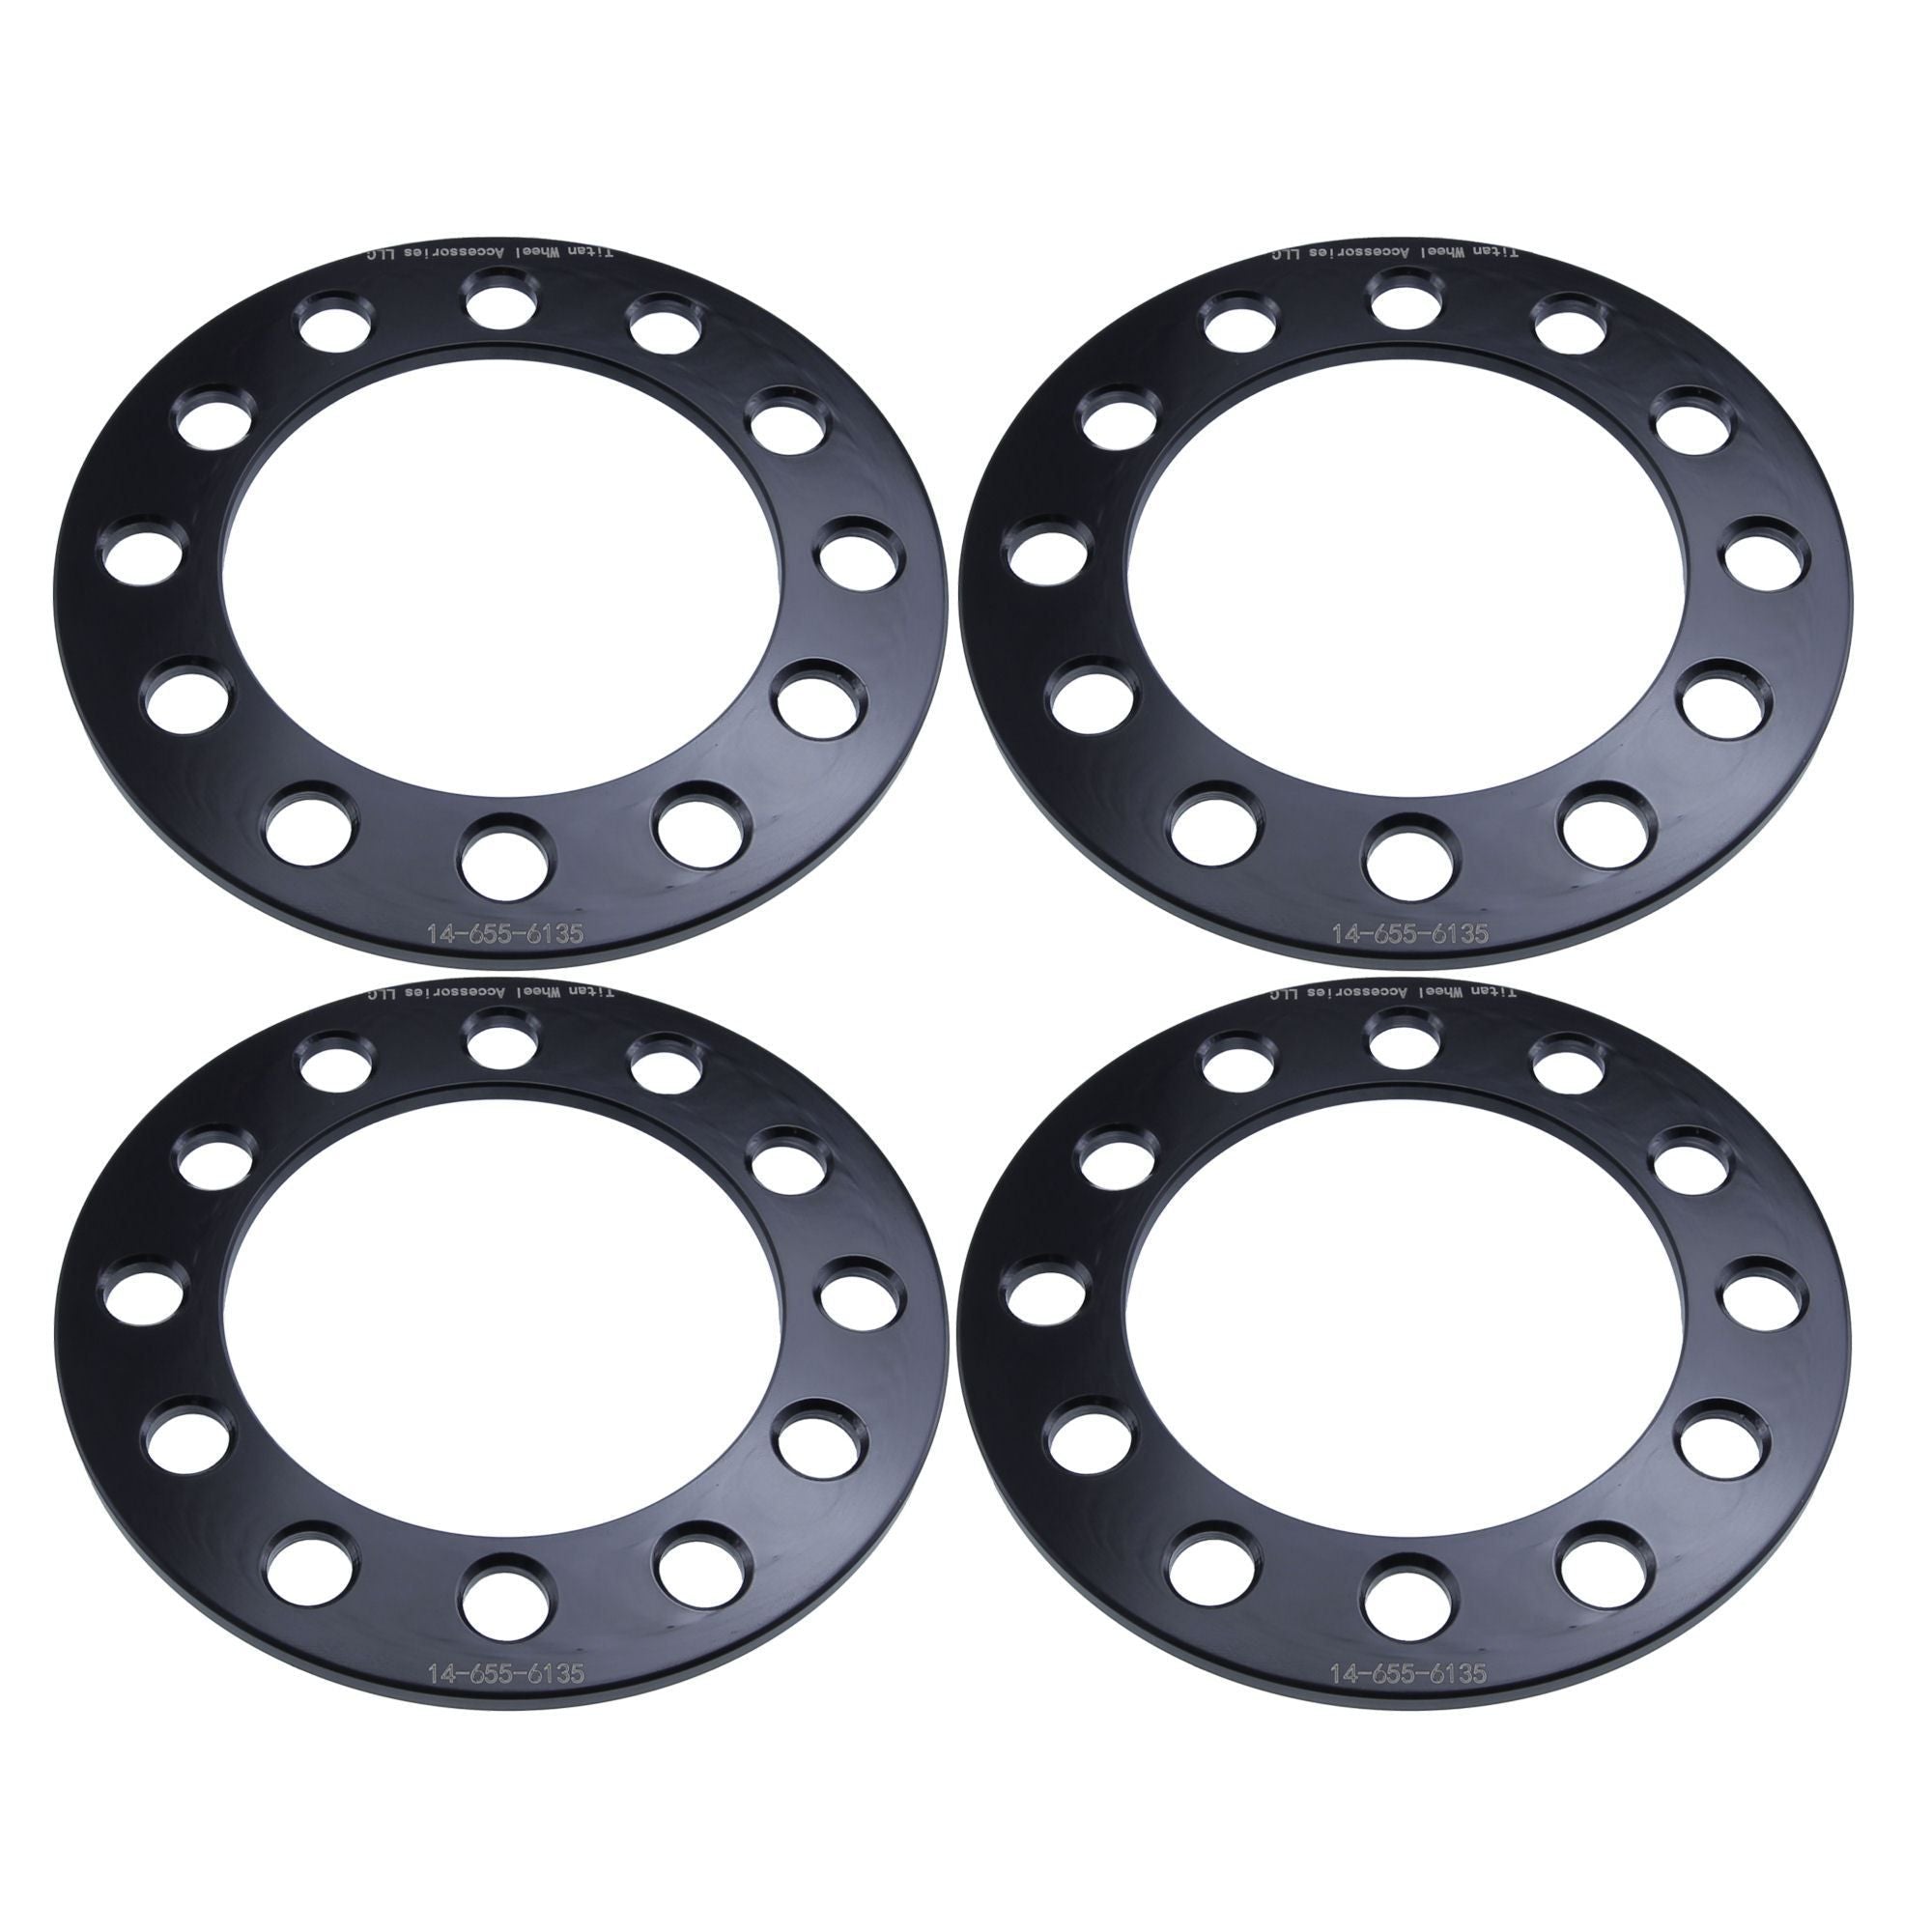 2 Inch Hubcentric Wheel Spacers for Ford F150 Navigator | 6x135